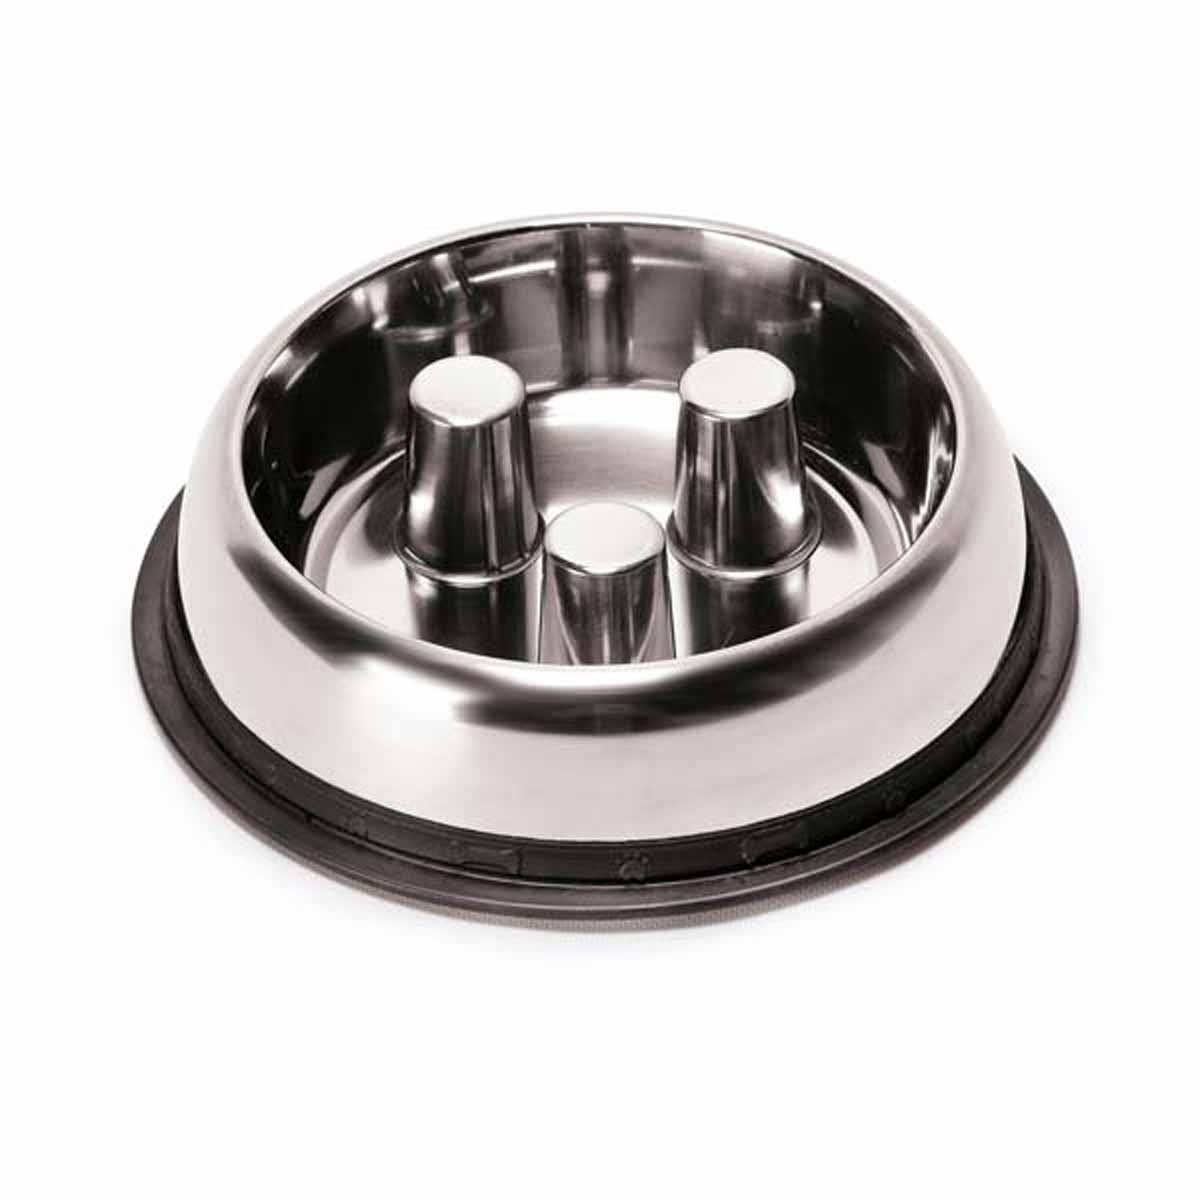 https://stuff.foryour.dog/cdn/shop/products/proselect-stainless-steel-slow-feed-dog-bowl-8909_1200x1200.jpg?v=1575479469